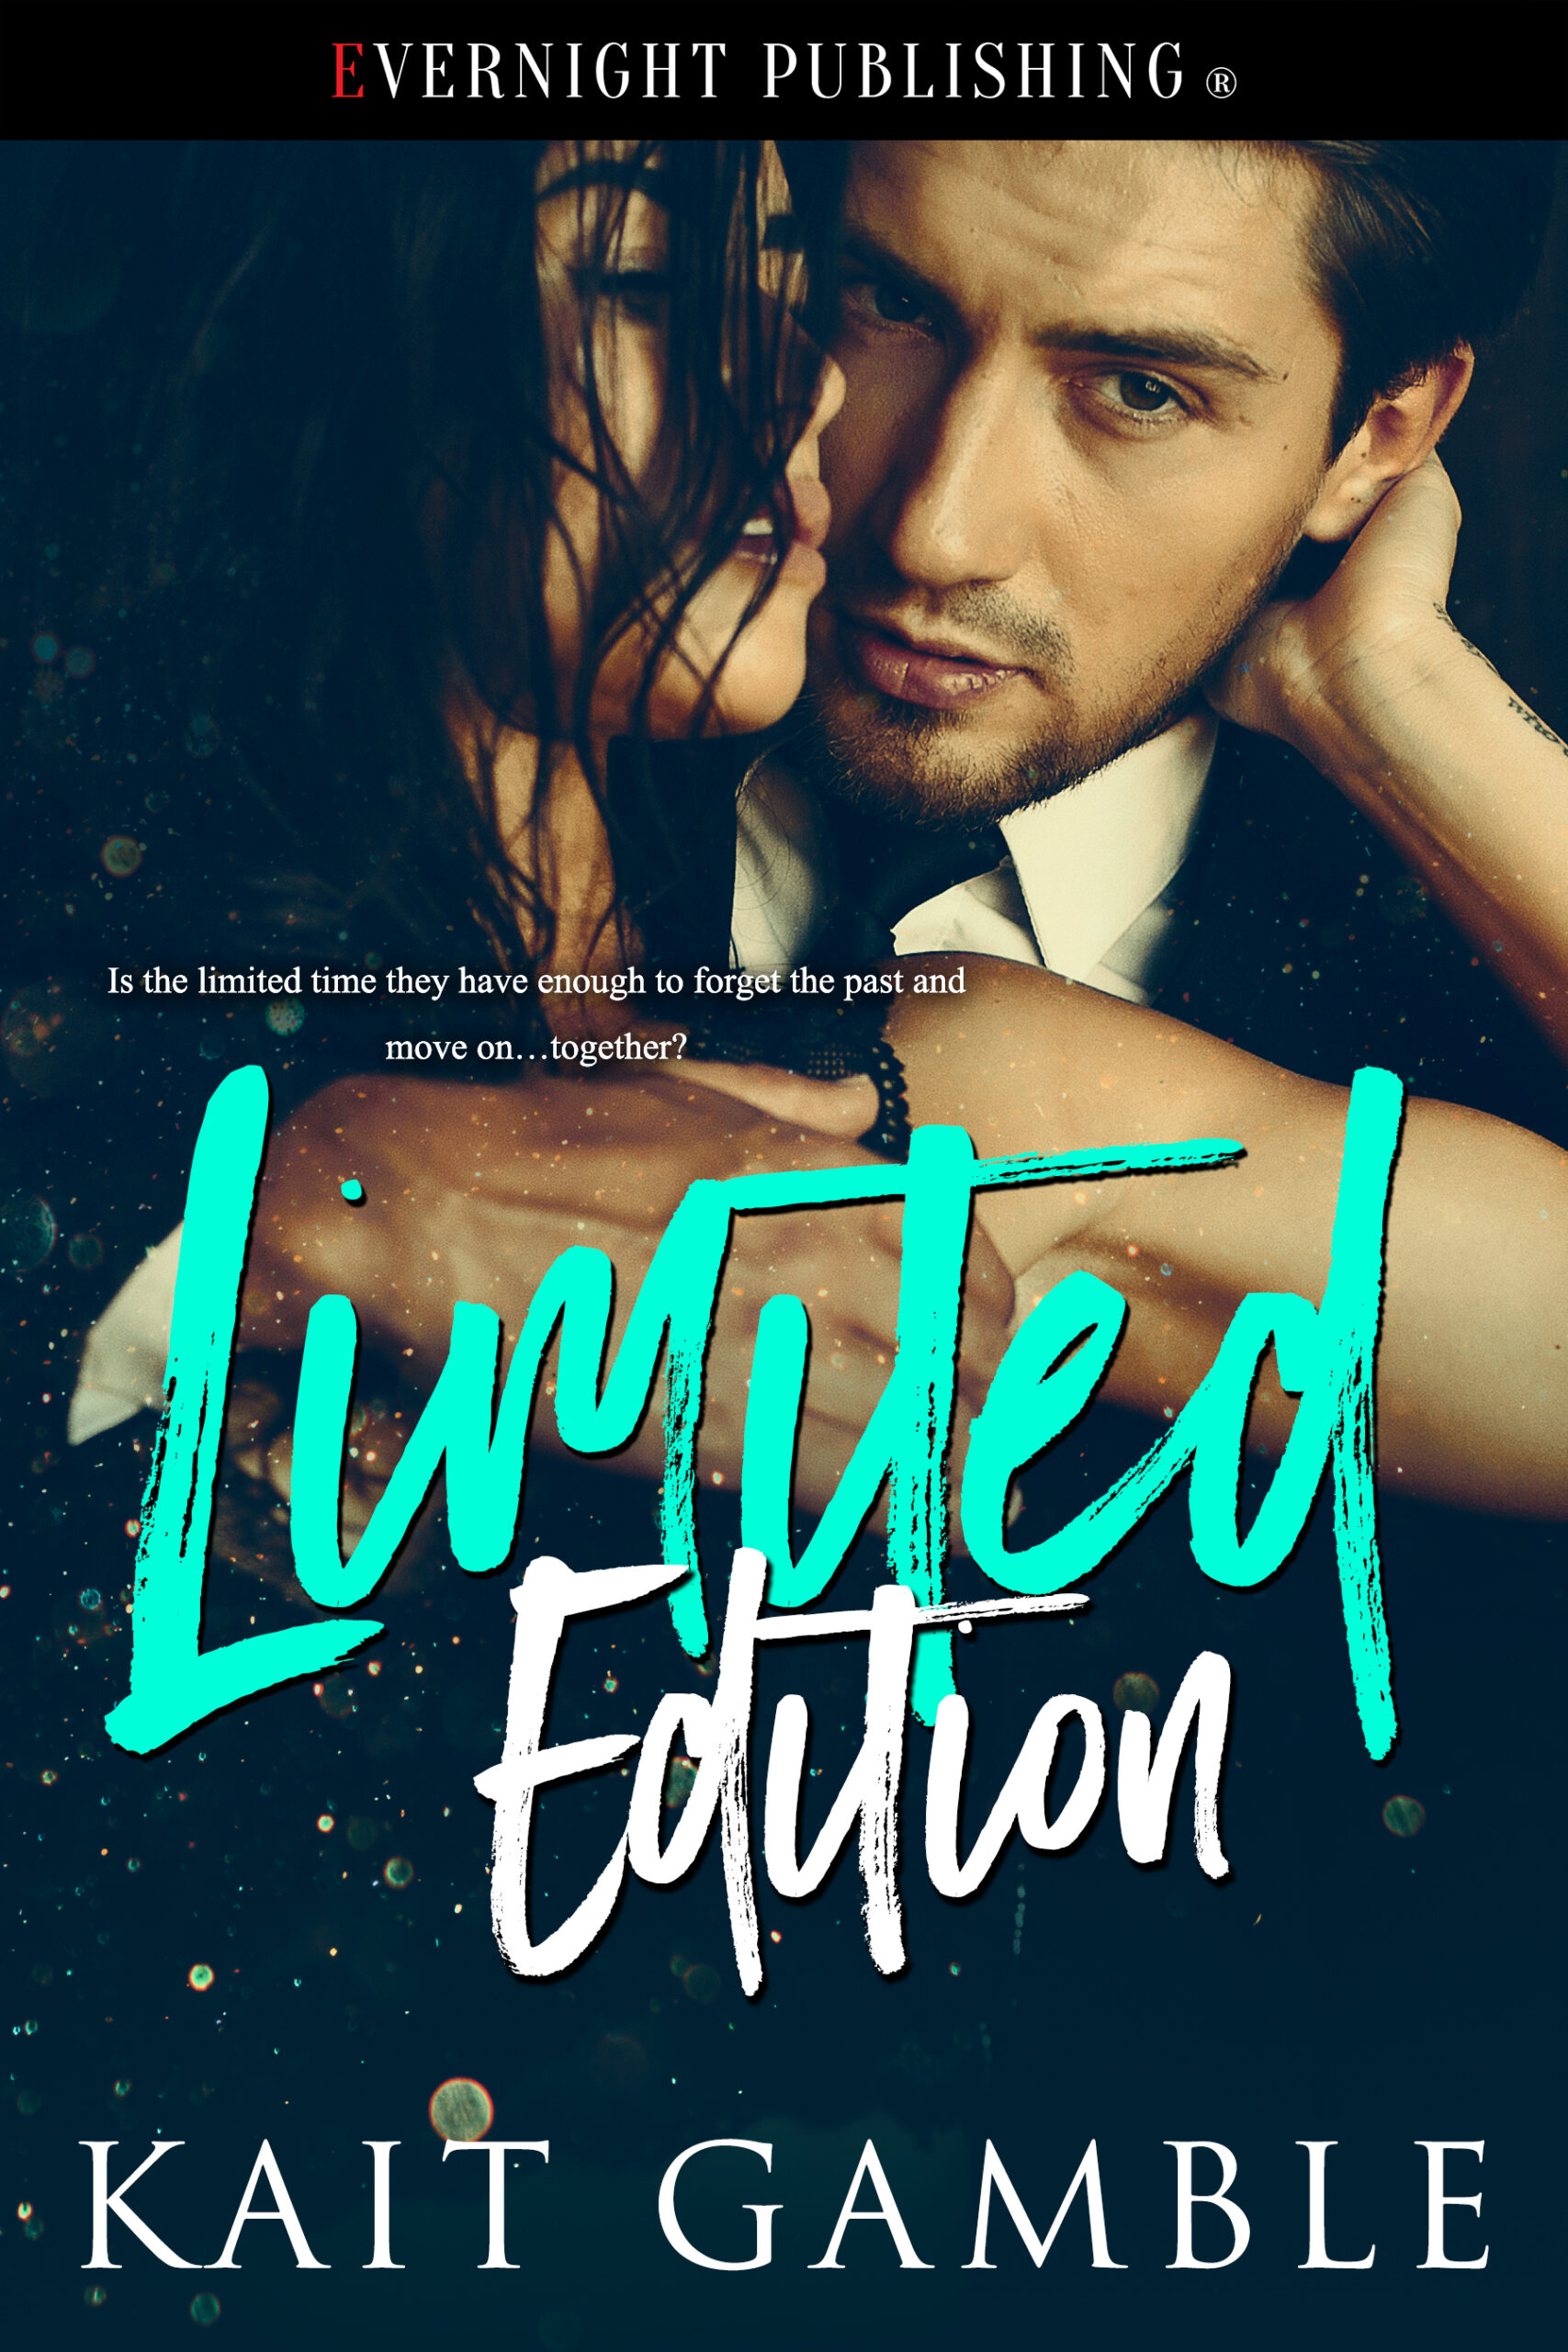 Limited Edition by Kait Gamble